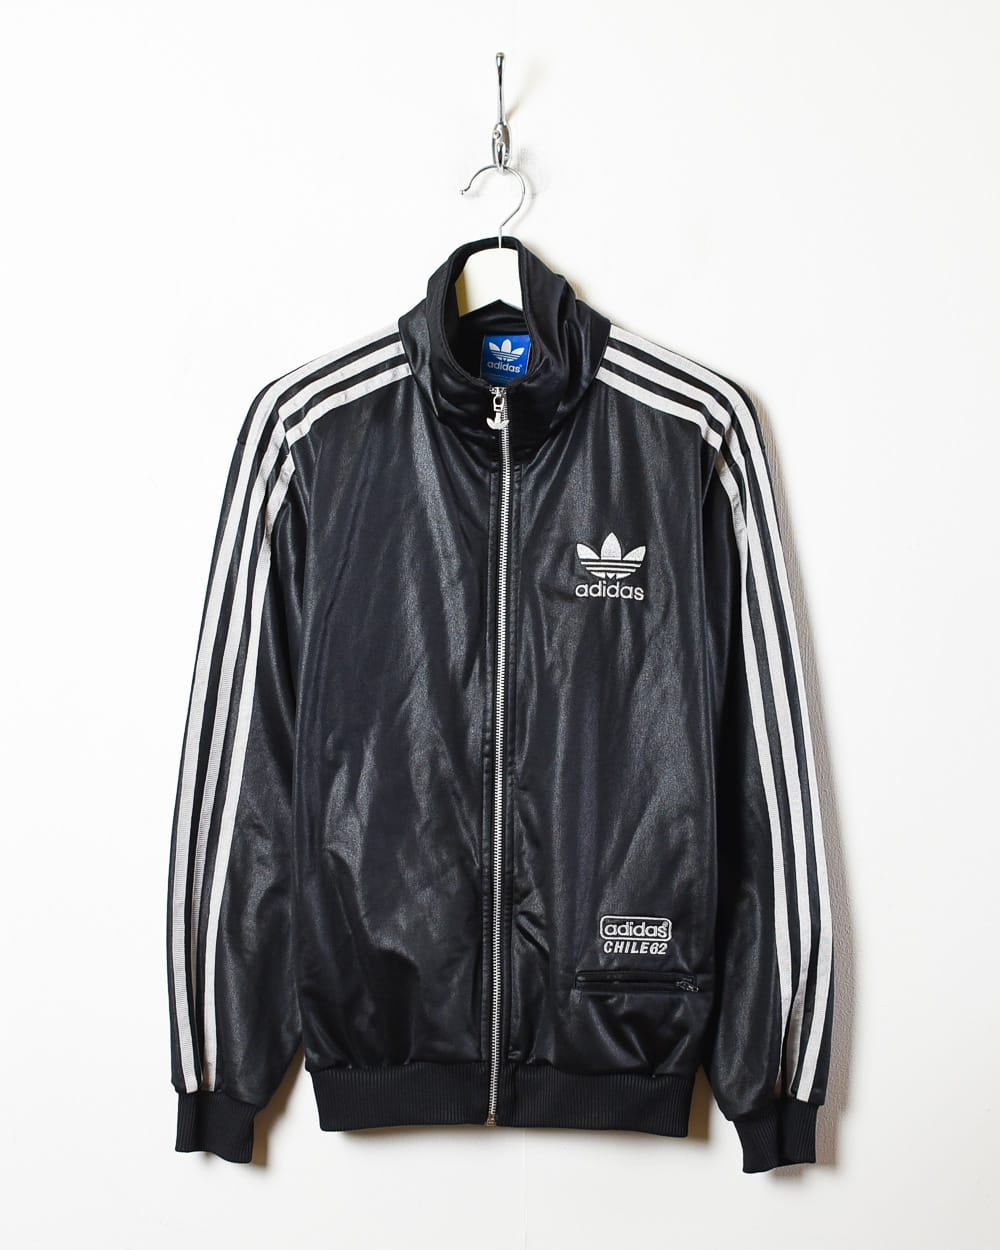 Vintage Adidas Chile 62 Tracksuit Top - Small – Domno Vintage